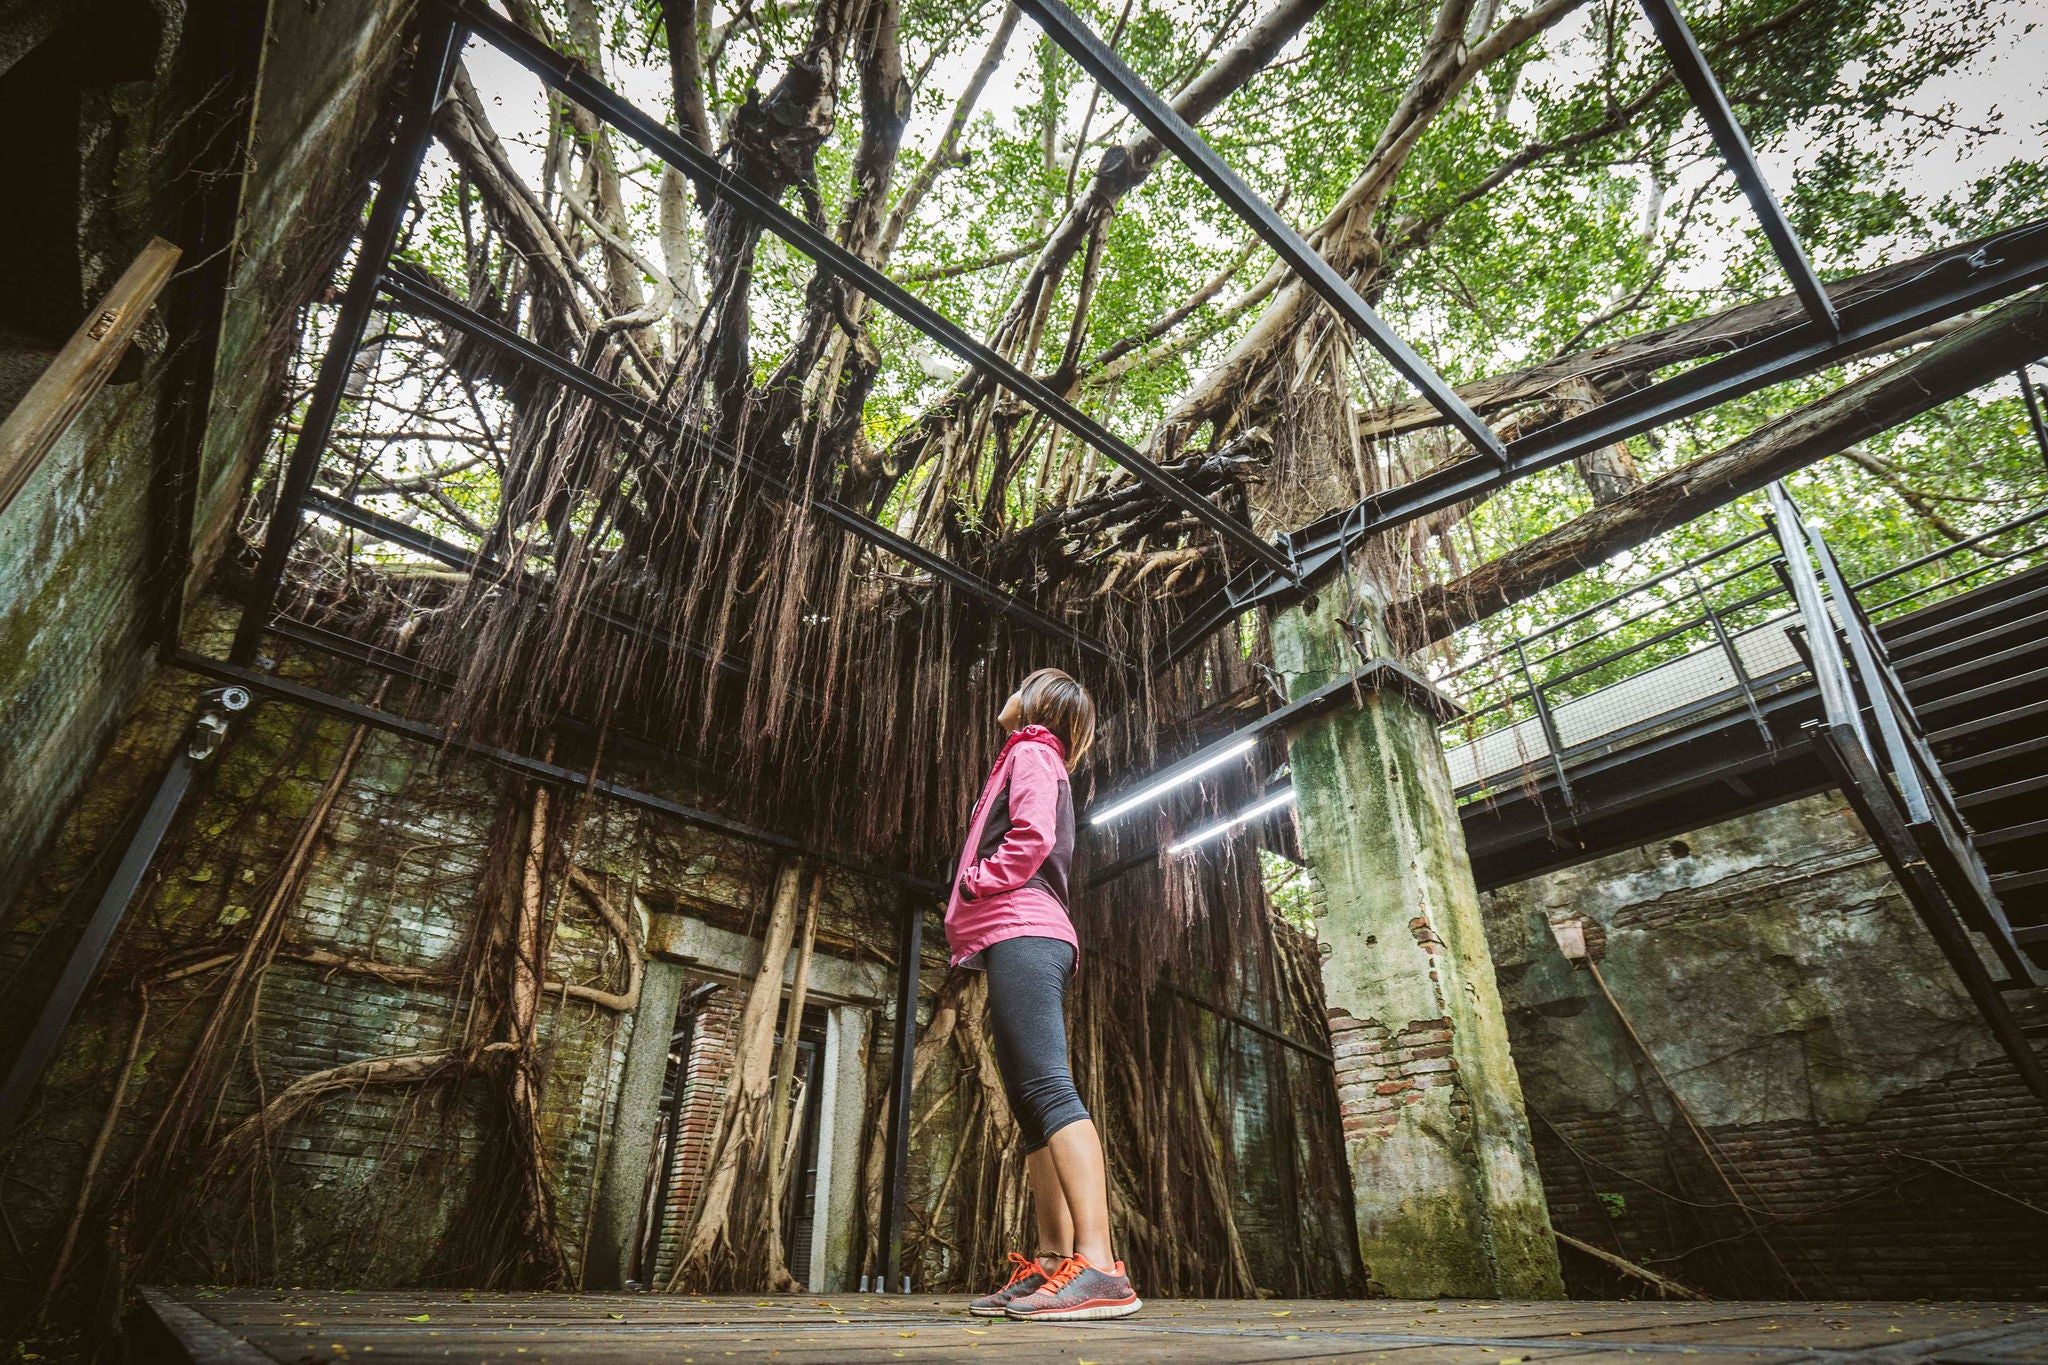 Young girl standing inside abandoned house covered with banyan roots and branches